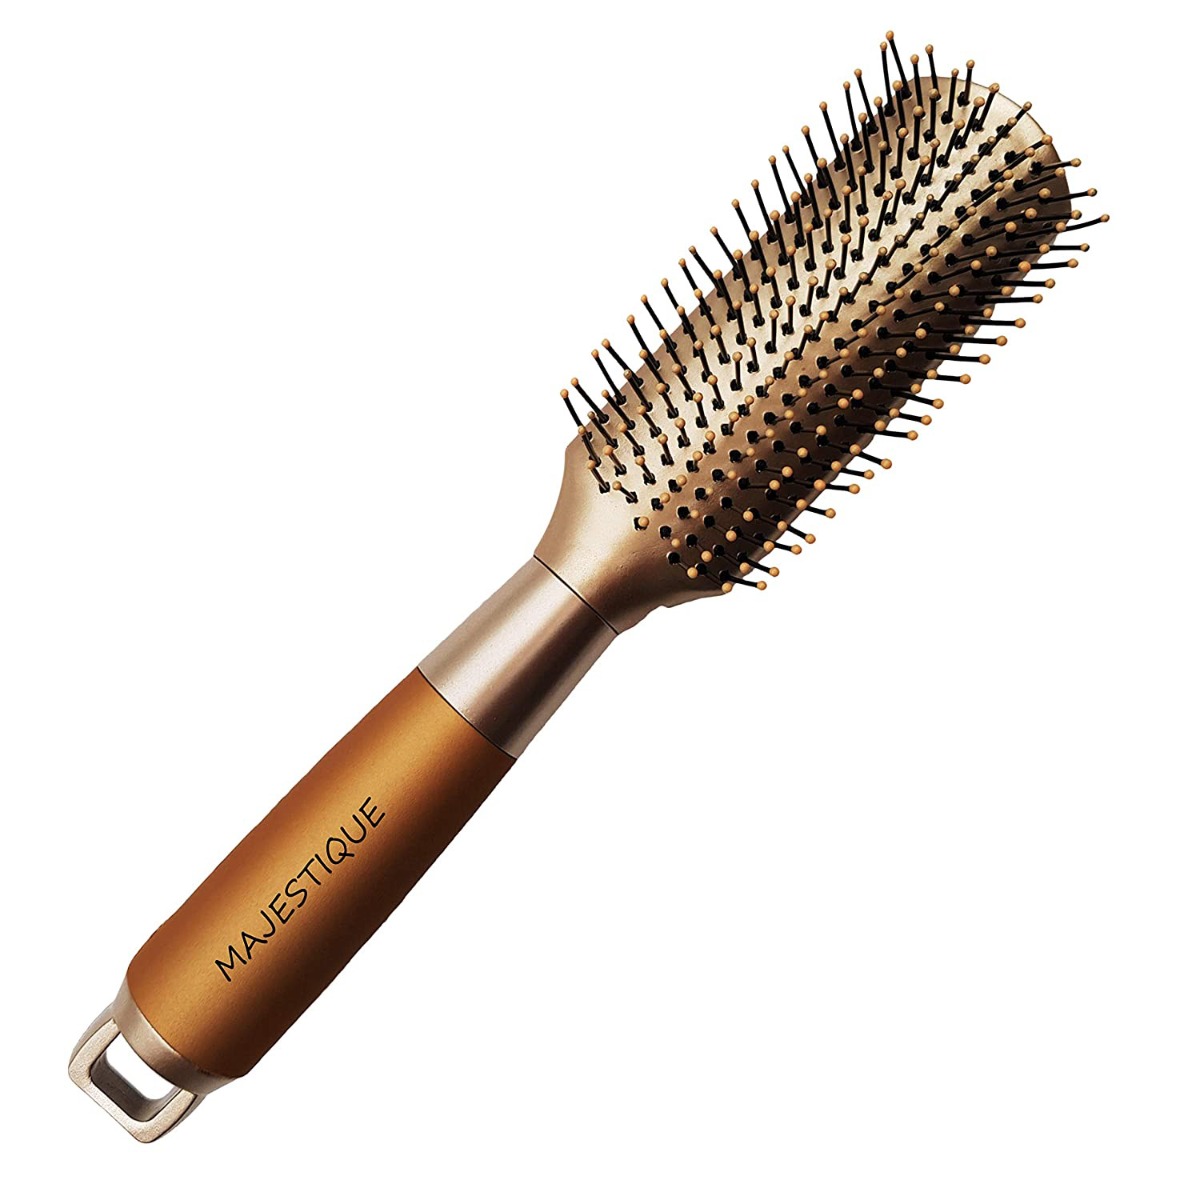 Majestique Fusion Vent Hair Brush For Blow Drying - Golden, 1Pc